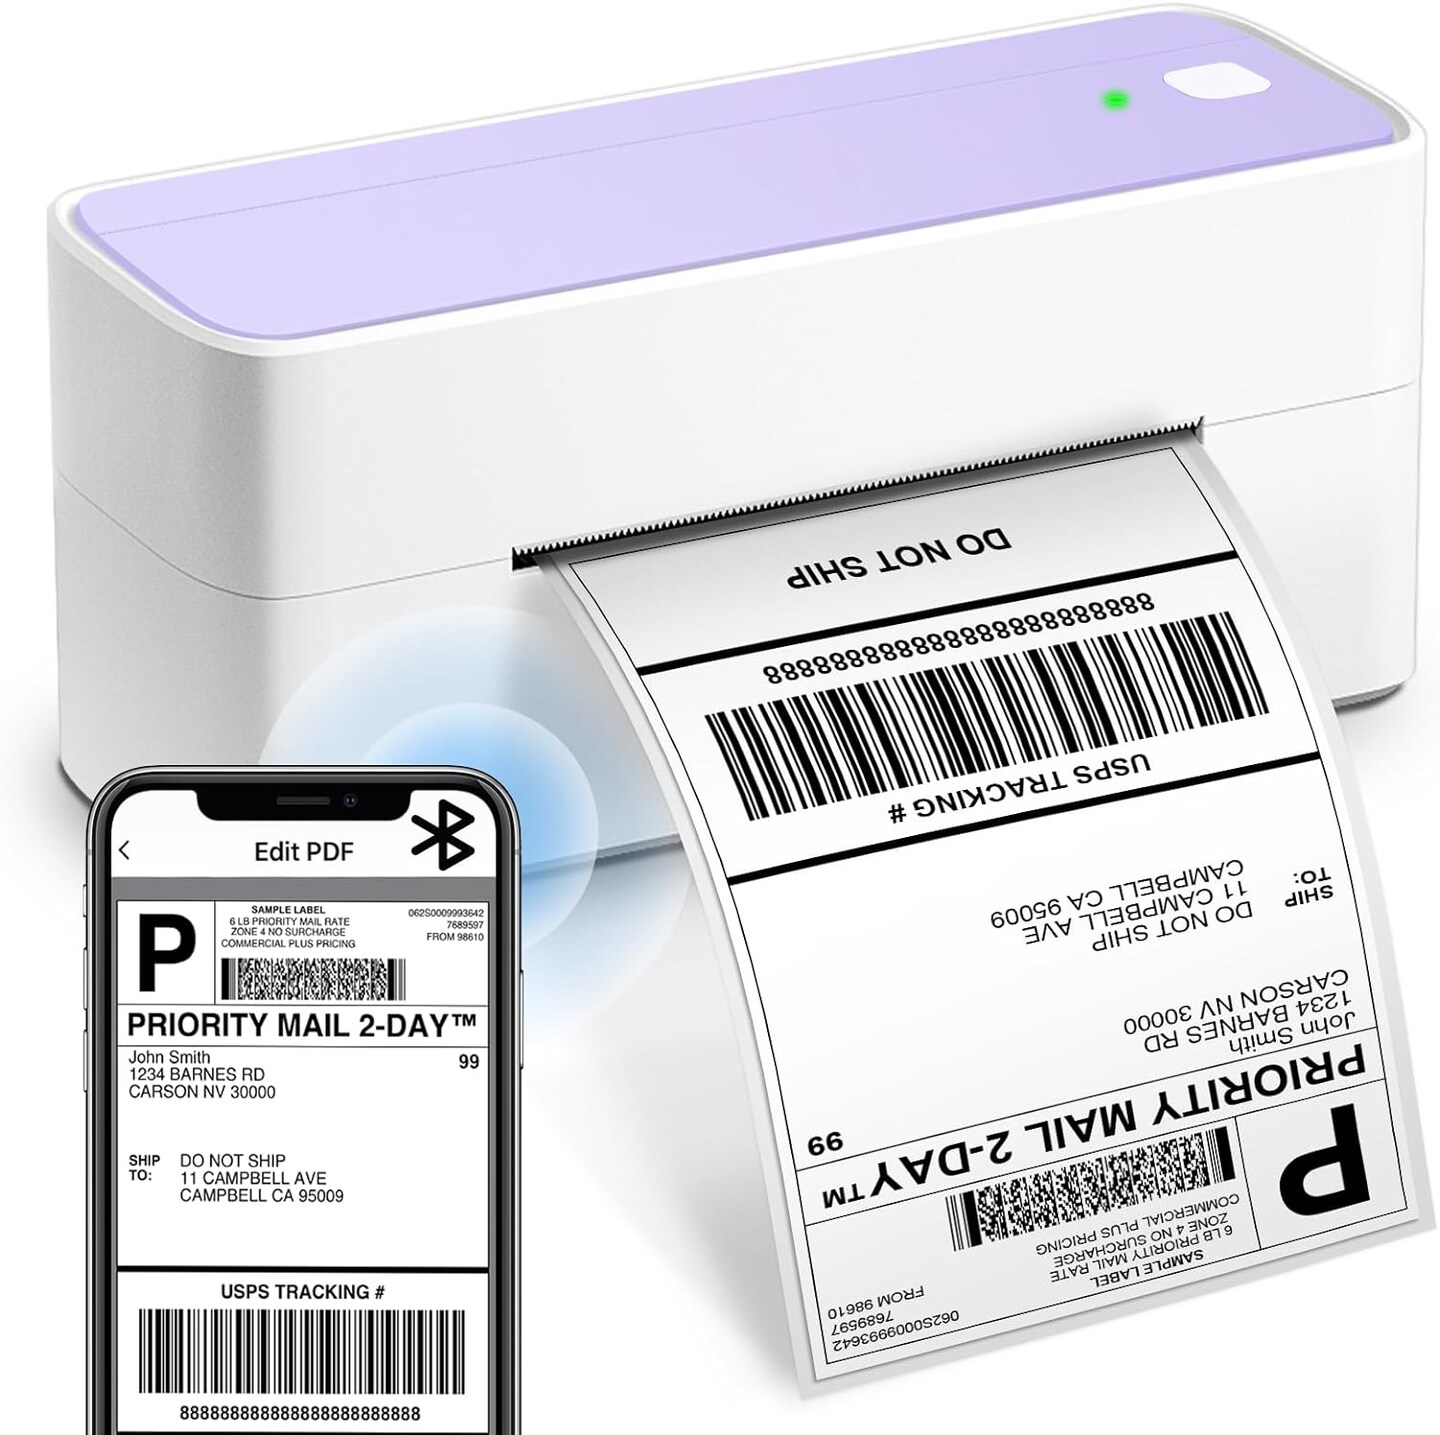 ASprink&#xAE; - Bluetooth Shipping Label Printer 4x6 - Streamline Your Shipping Process with Ease